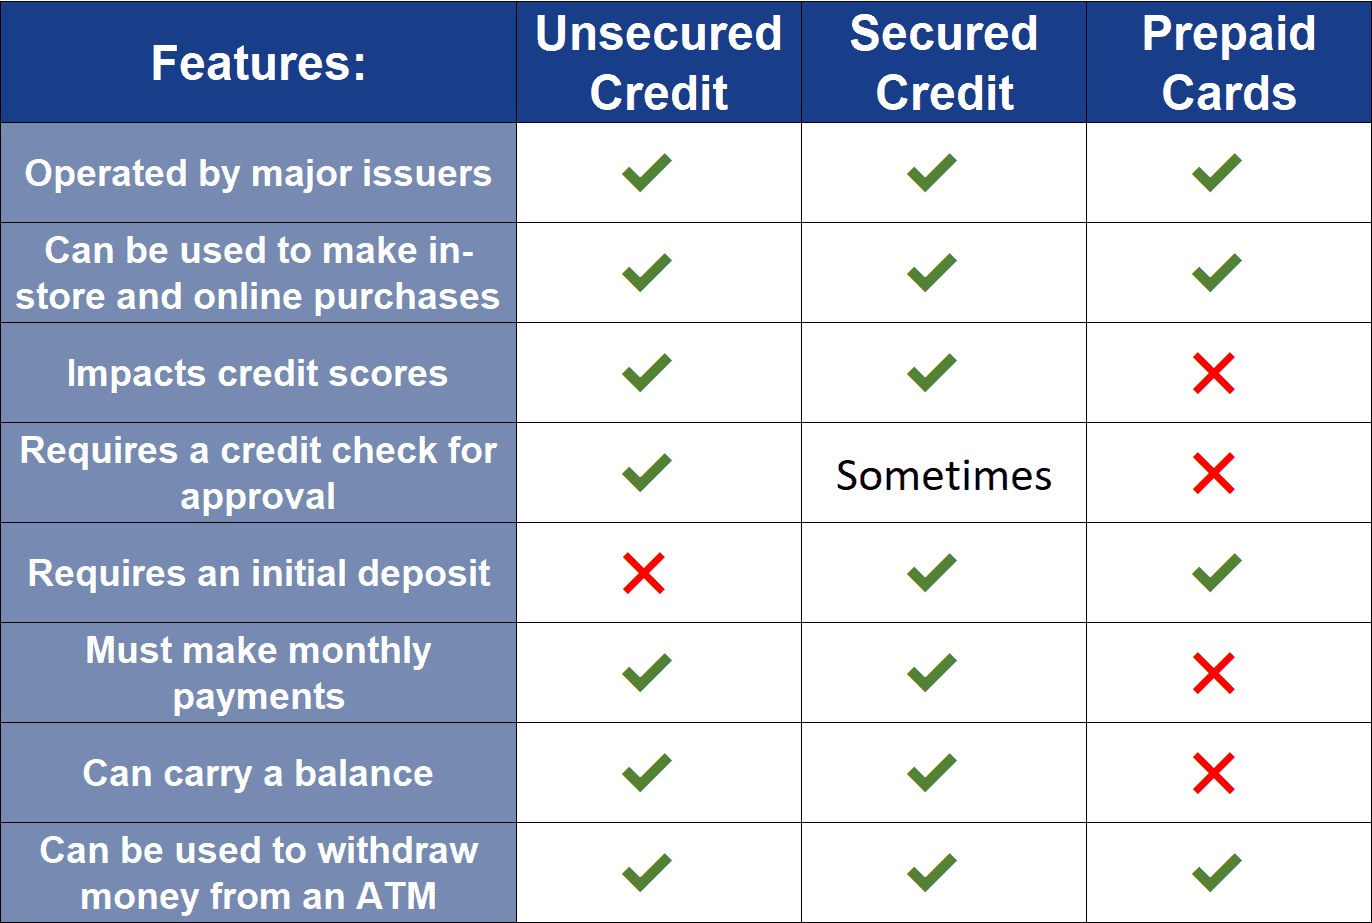 Prepaid Cards vs. Secured and Unsecured Credit Cards